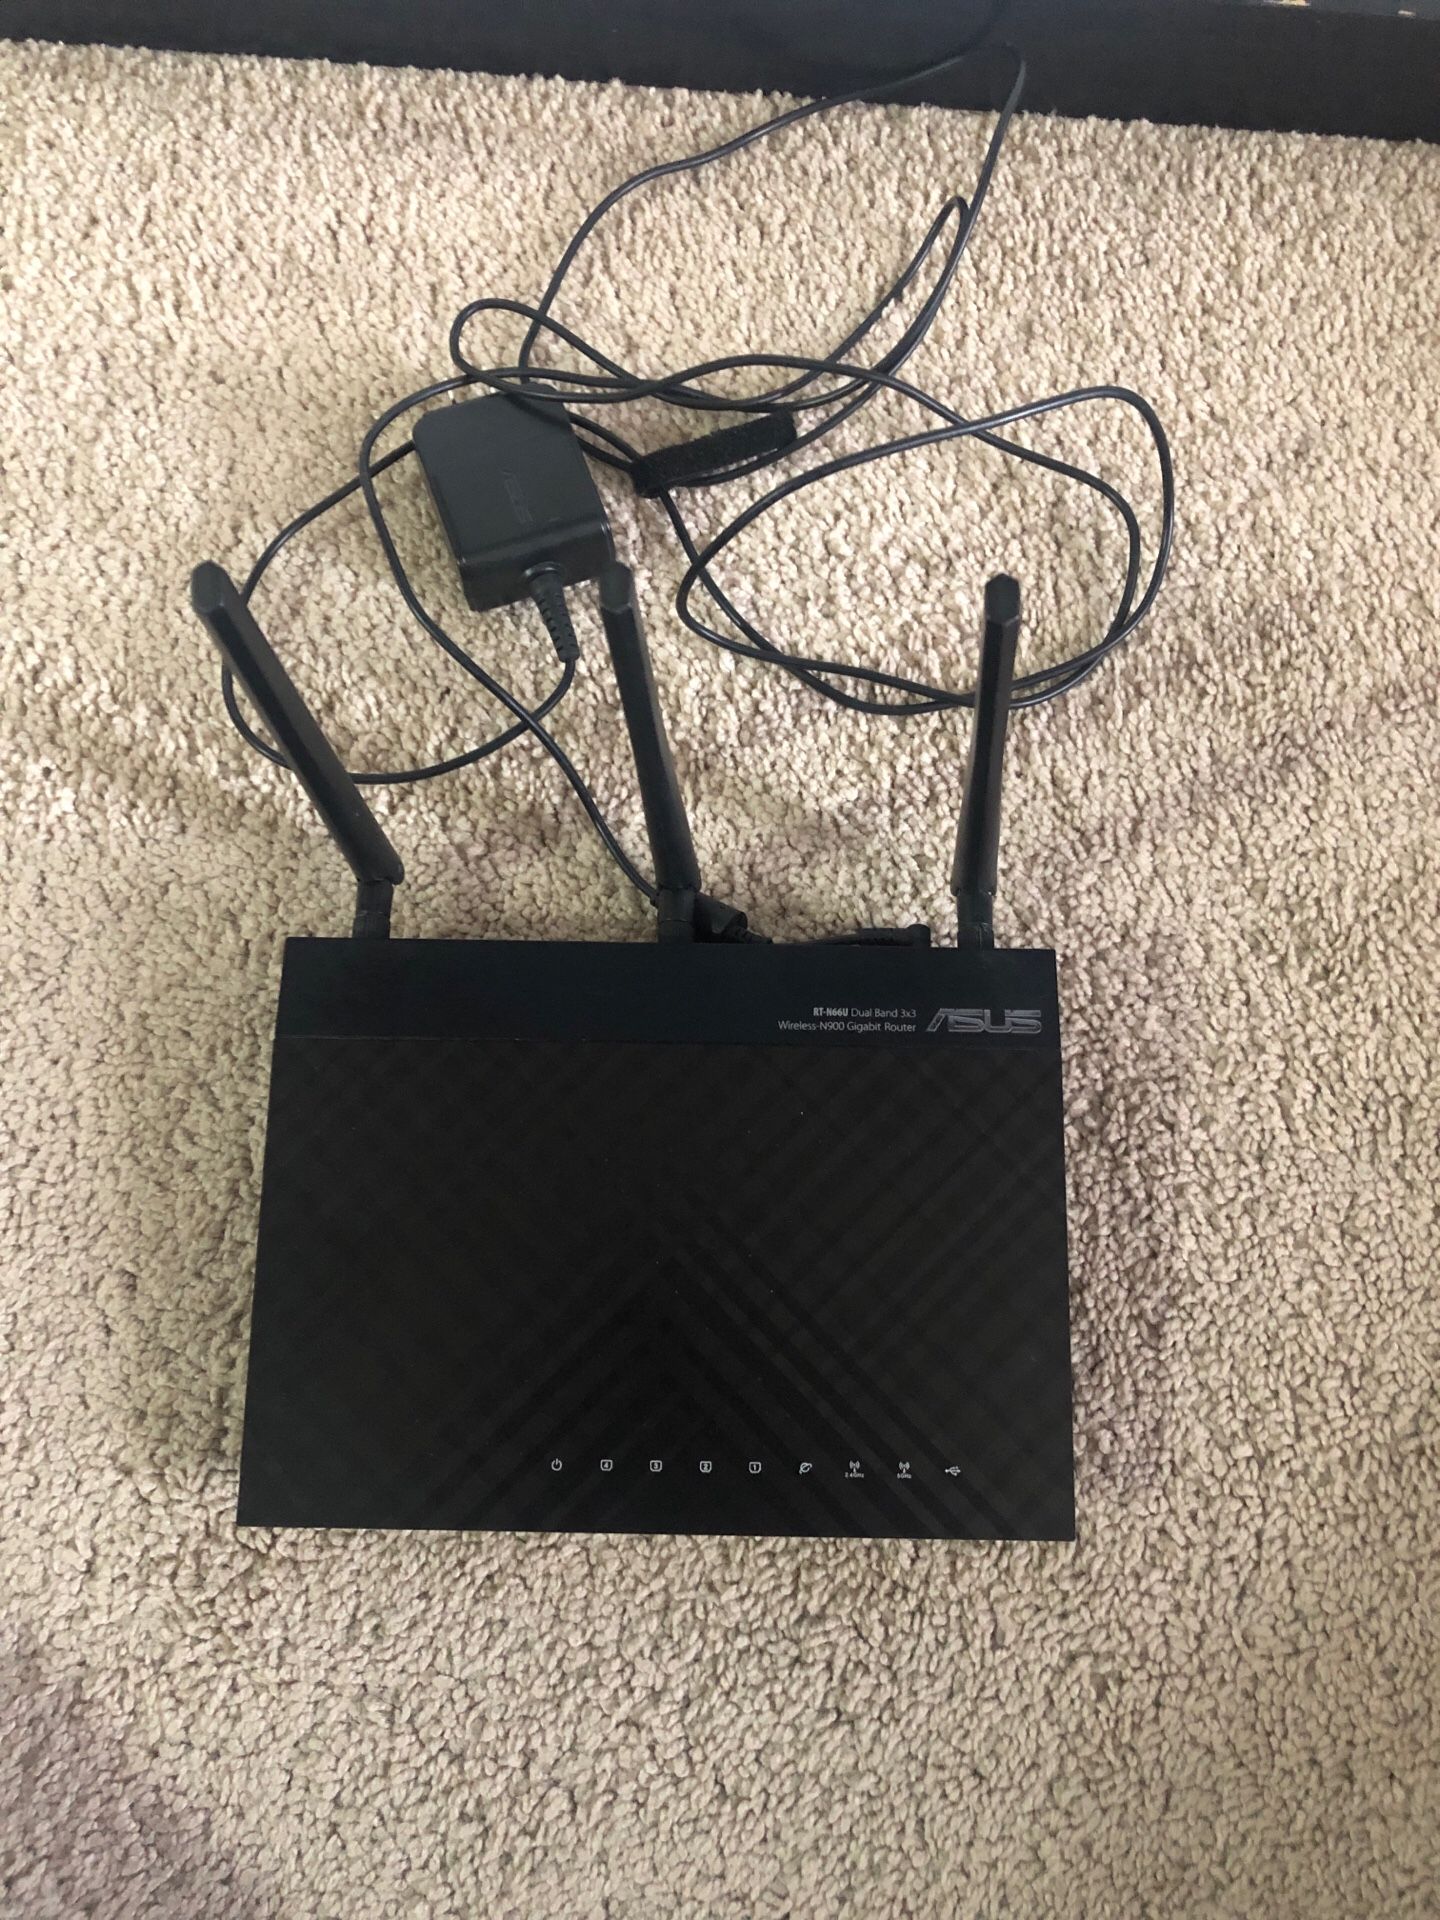 Asus router like new